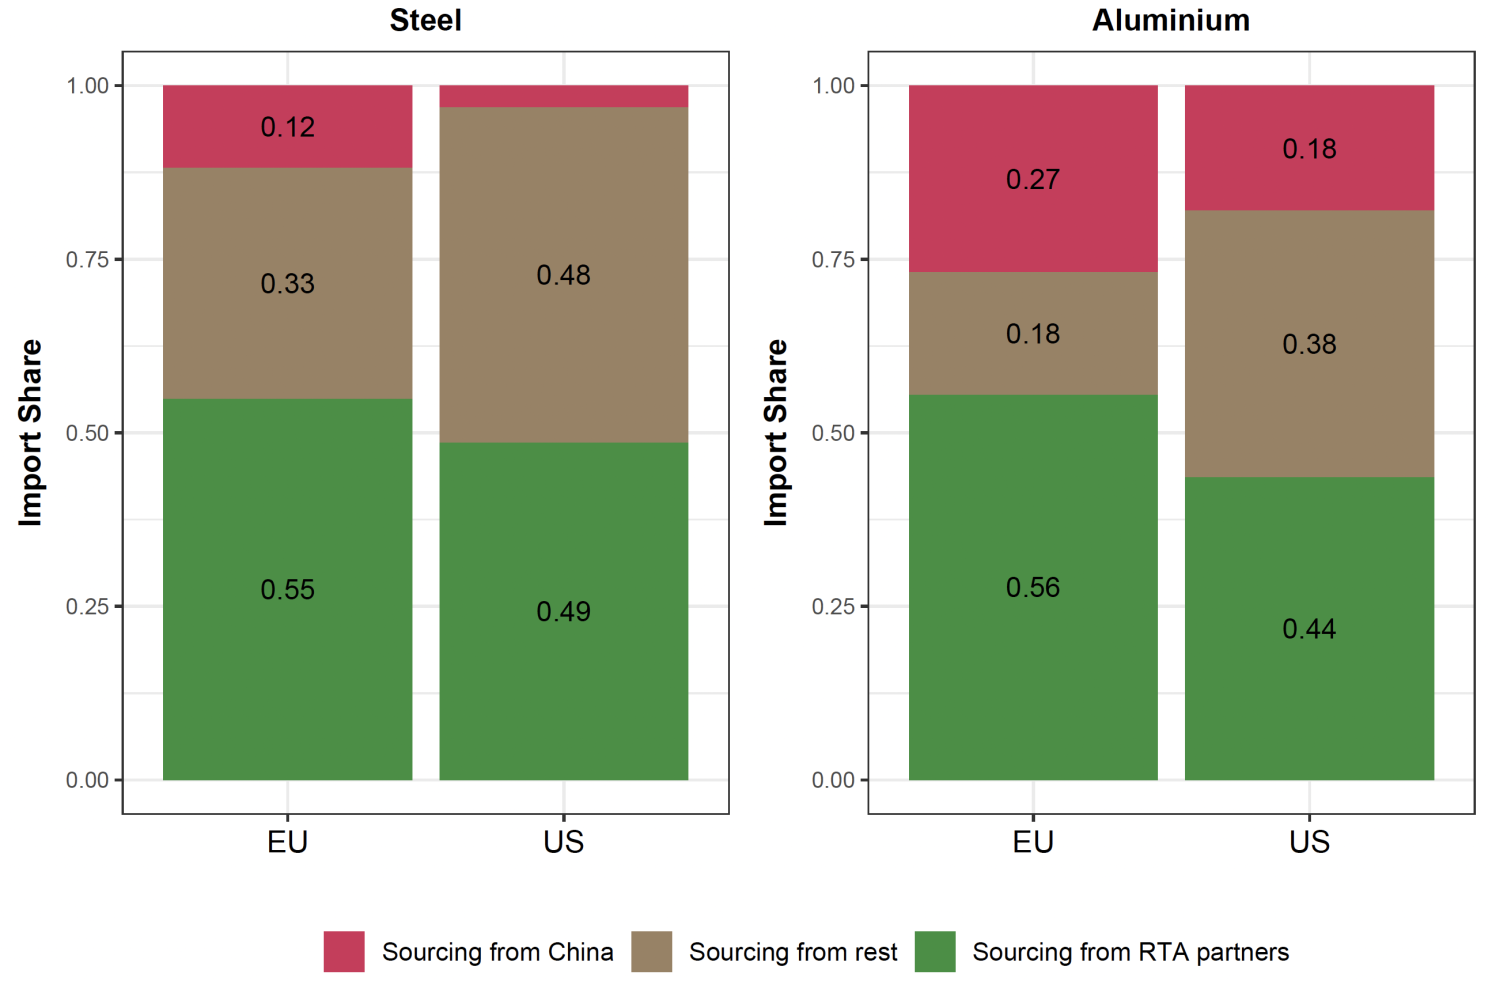 Figure 2 In 2022 the EU and US sourced lots of steel and aluminium from RTA partners